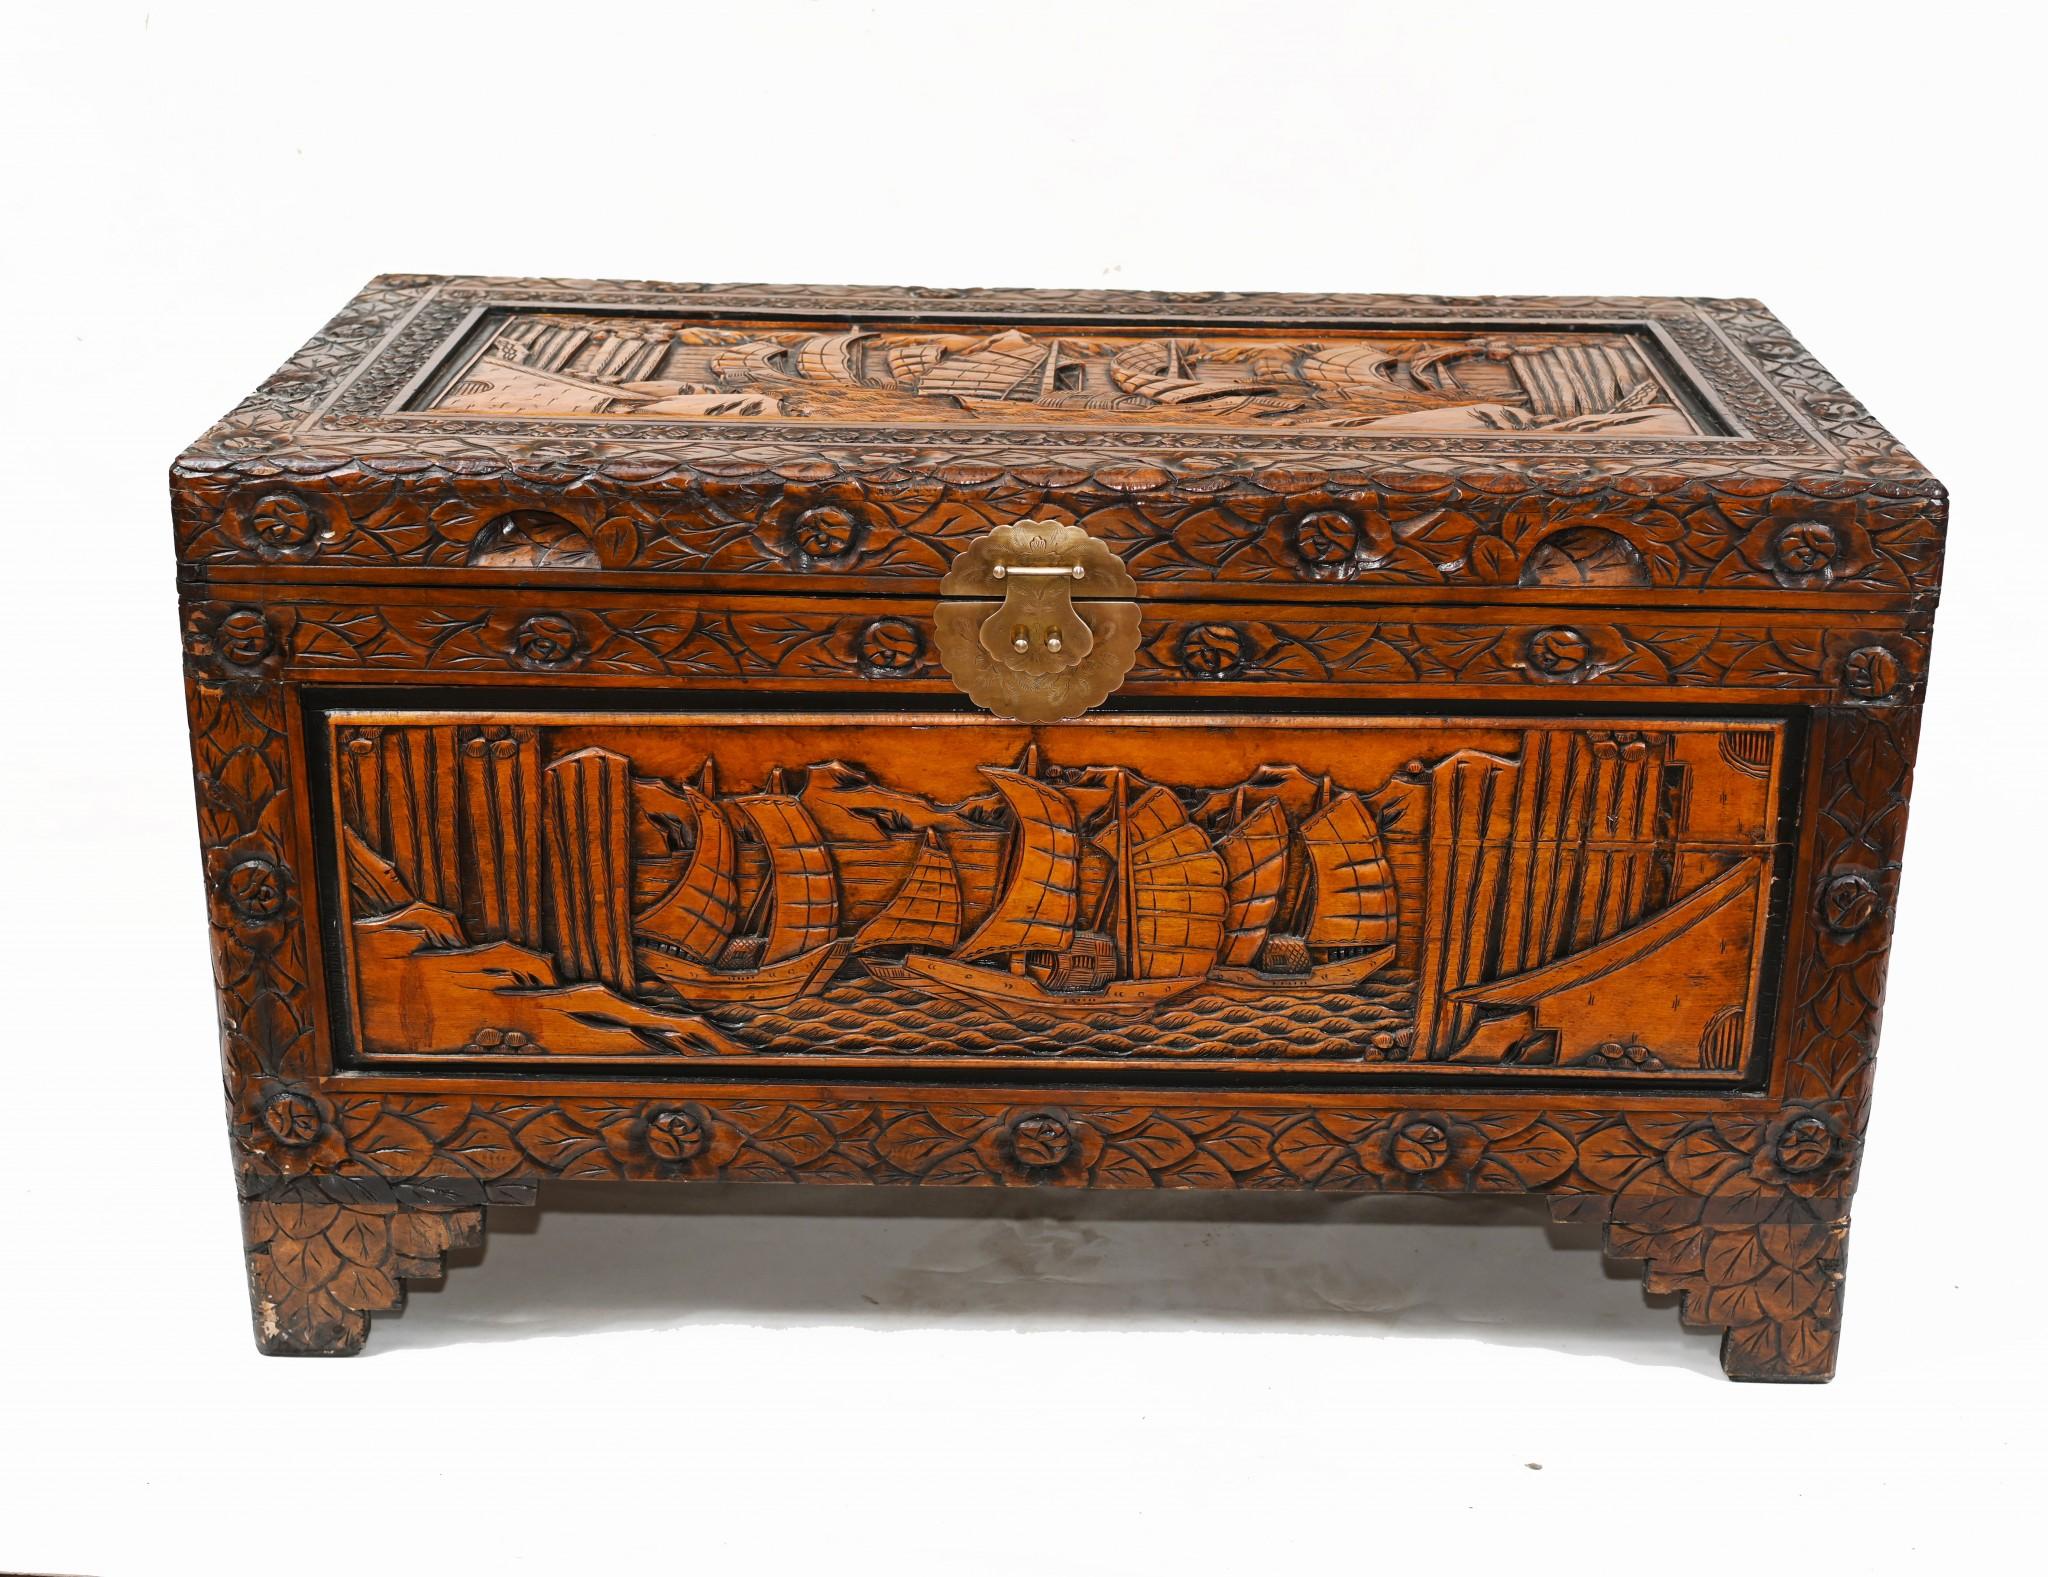 Gorgeous Chinese carved chest crafted from camphor wood
Very detailed carving showing Chinese junk sail boats
Opens out to reveal lots of storage
Great interiors piece and highly collectable
Can also function as a coffee table
Most of these